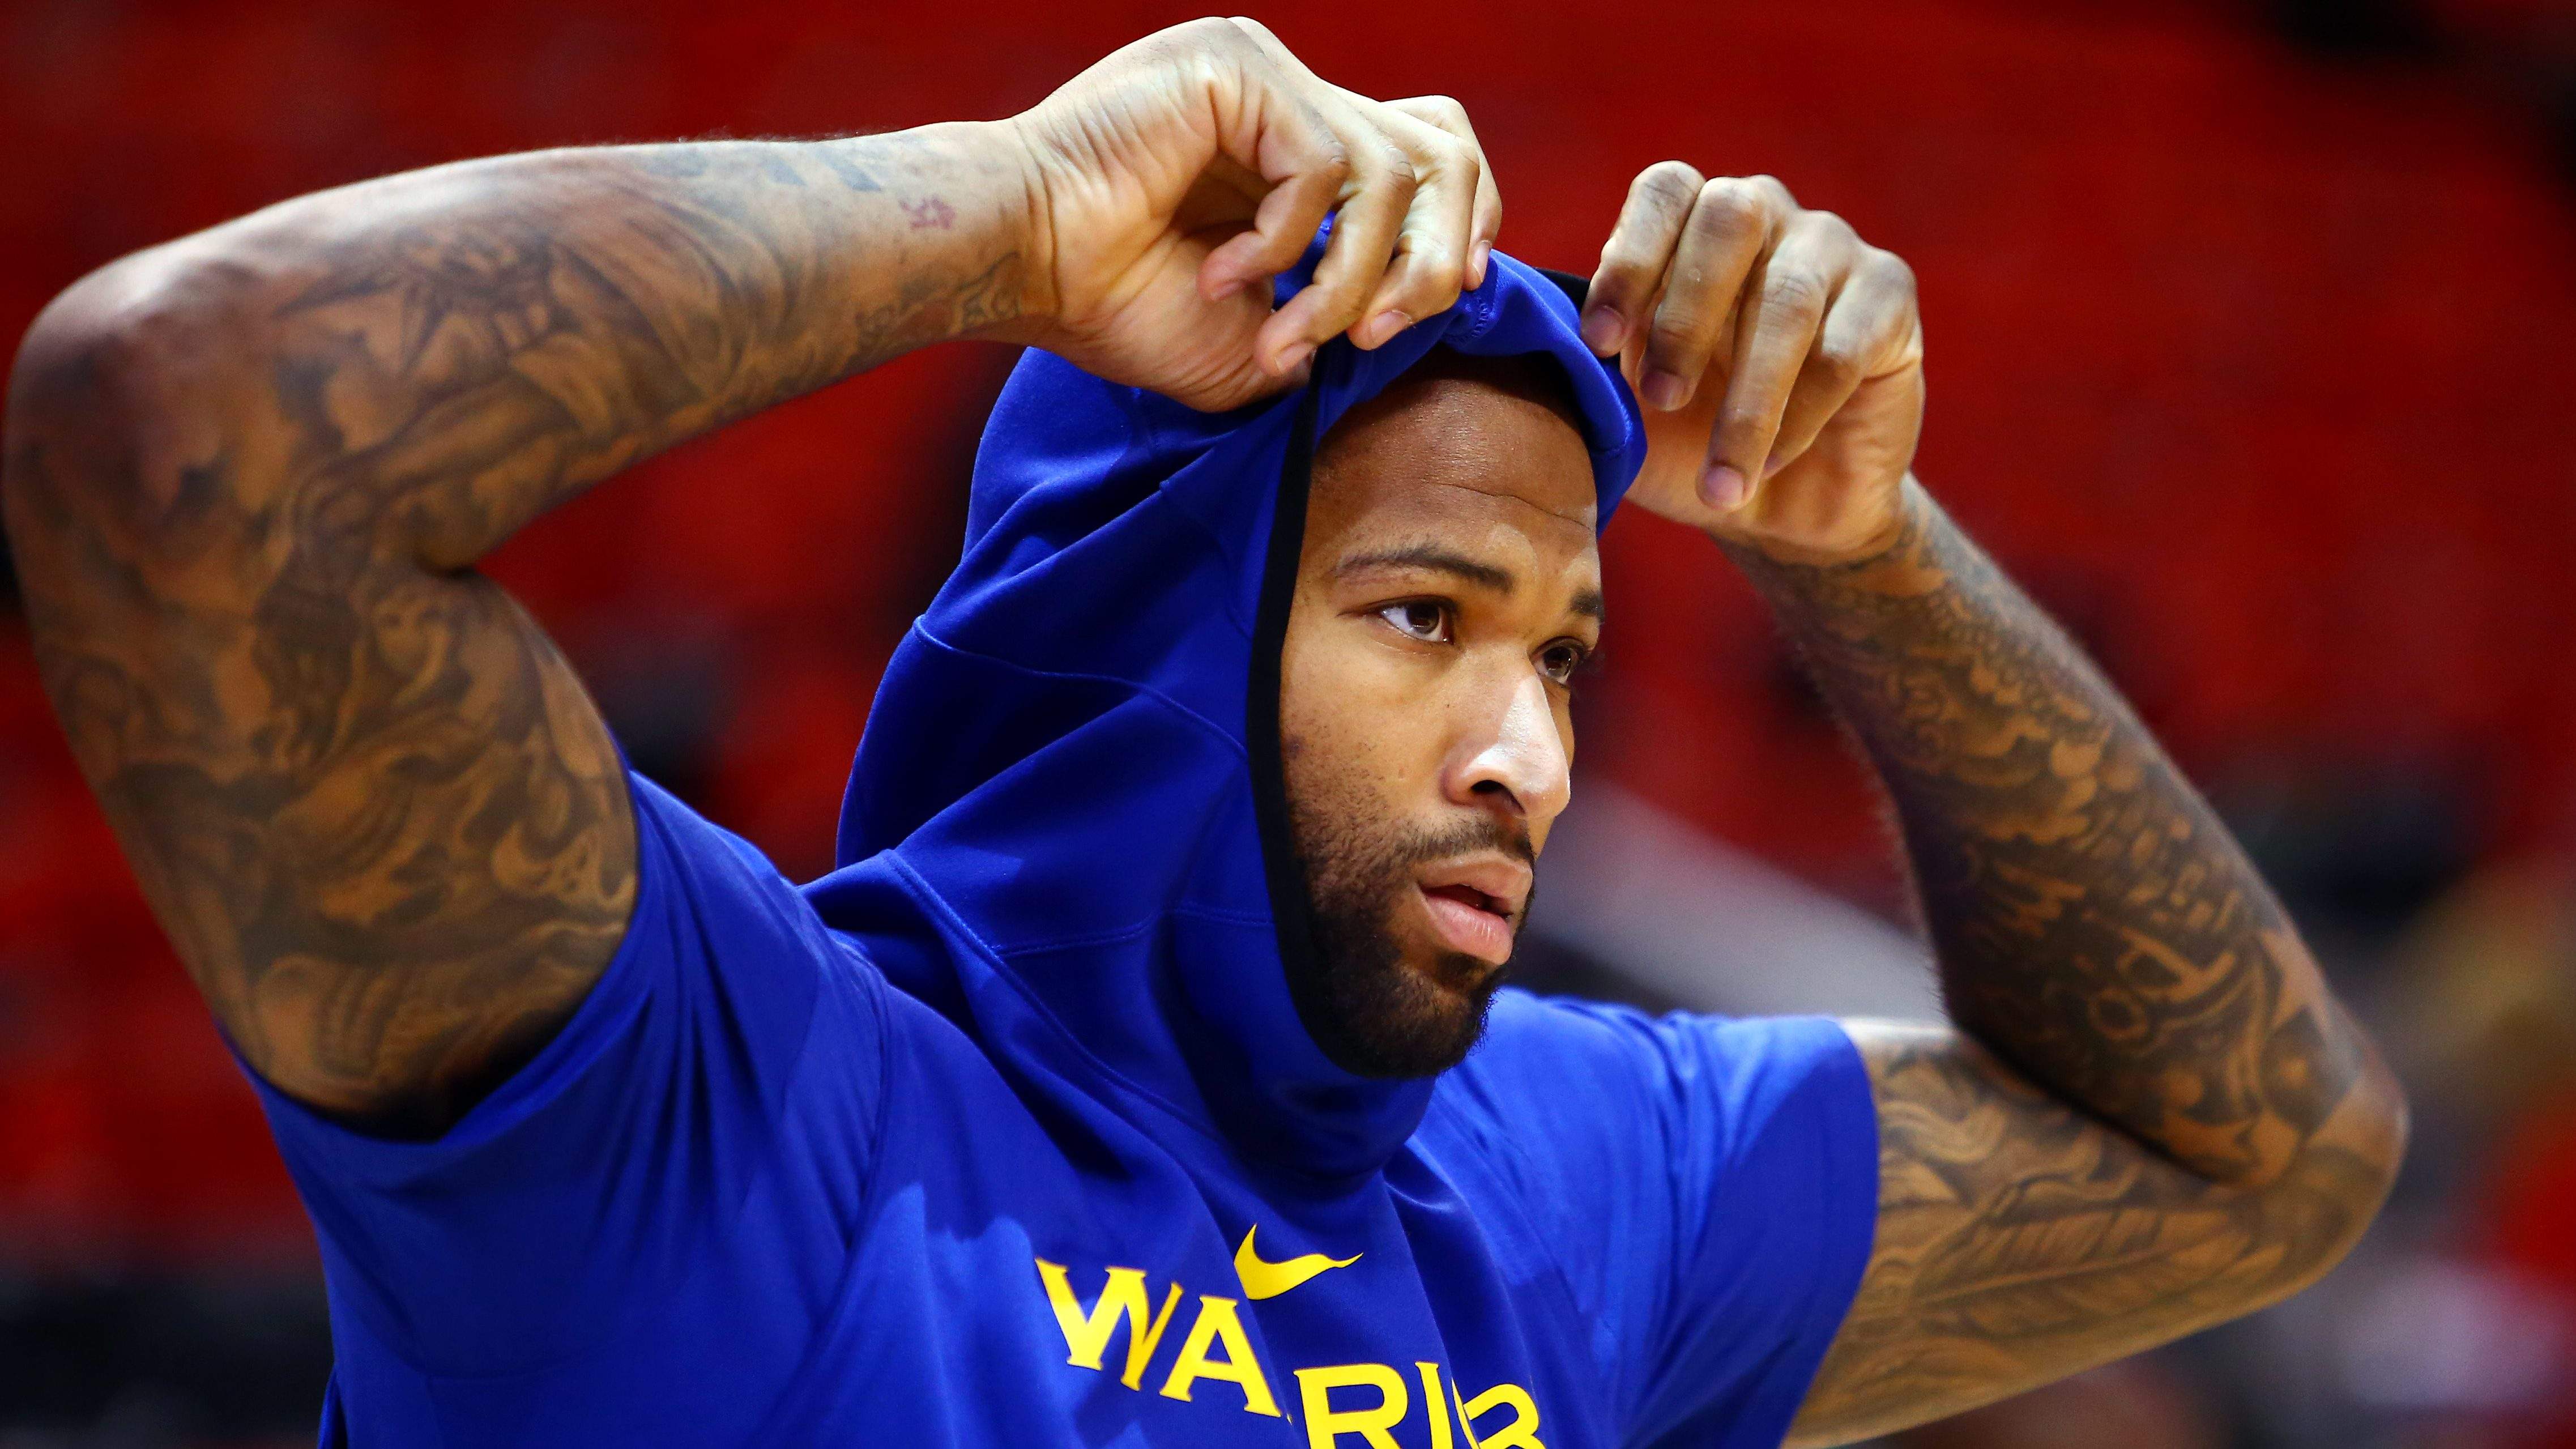 DeMarcus Cousins is in Big Trouble as NBA Season has been Suspended due to Coronavirus